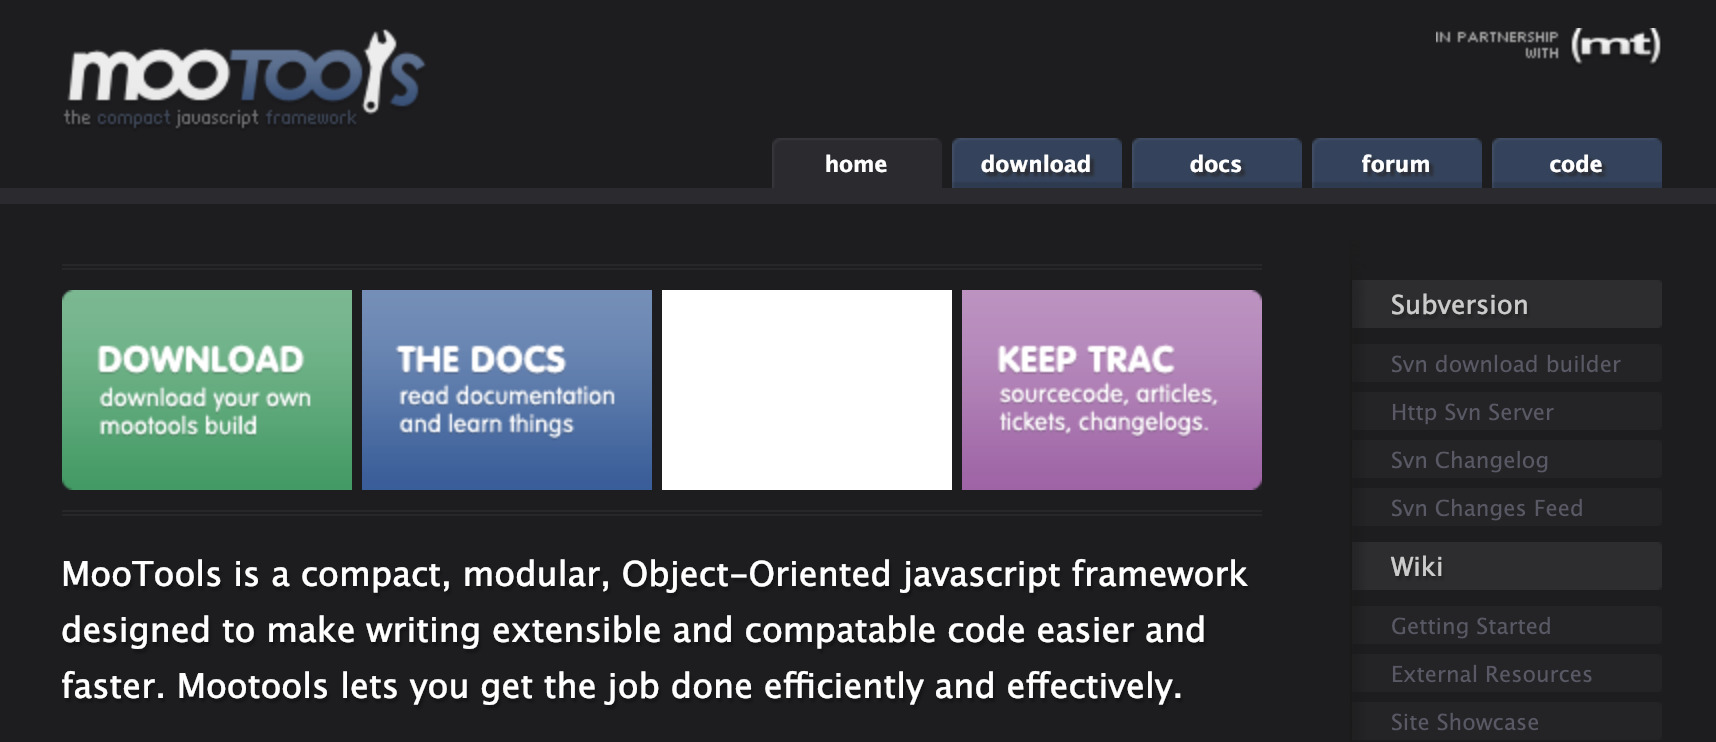 MooTools is a compact, modular, Object-oriented JavaScript framework designed to make writing extensible and compatible code easier and faster.